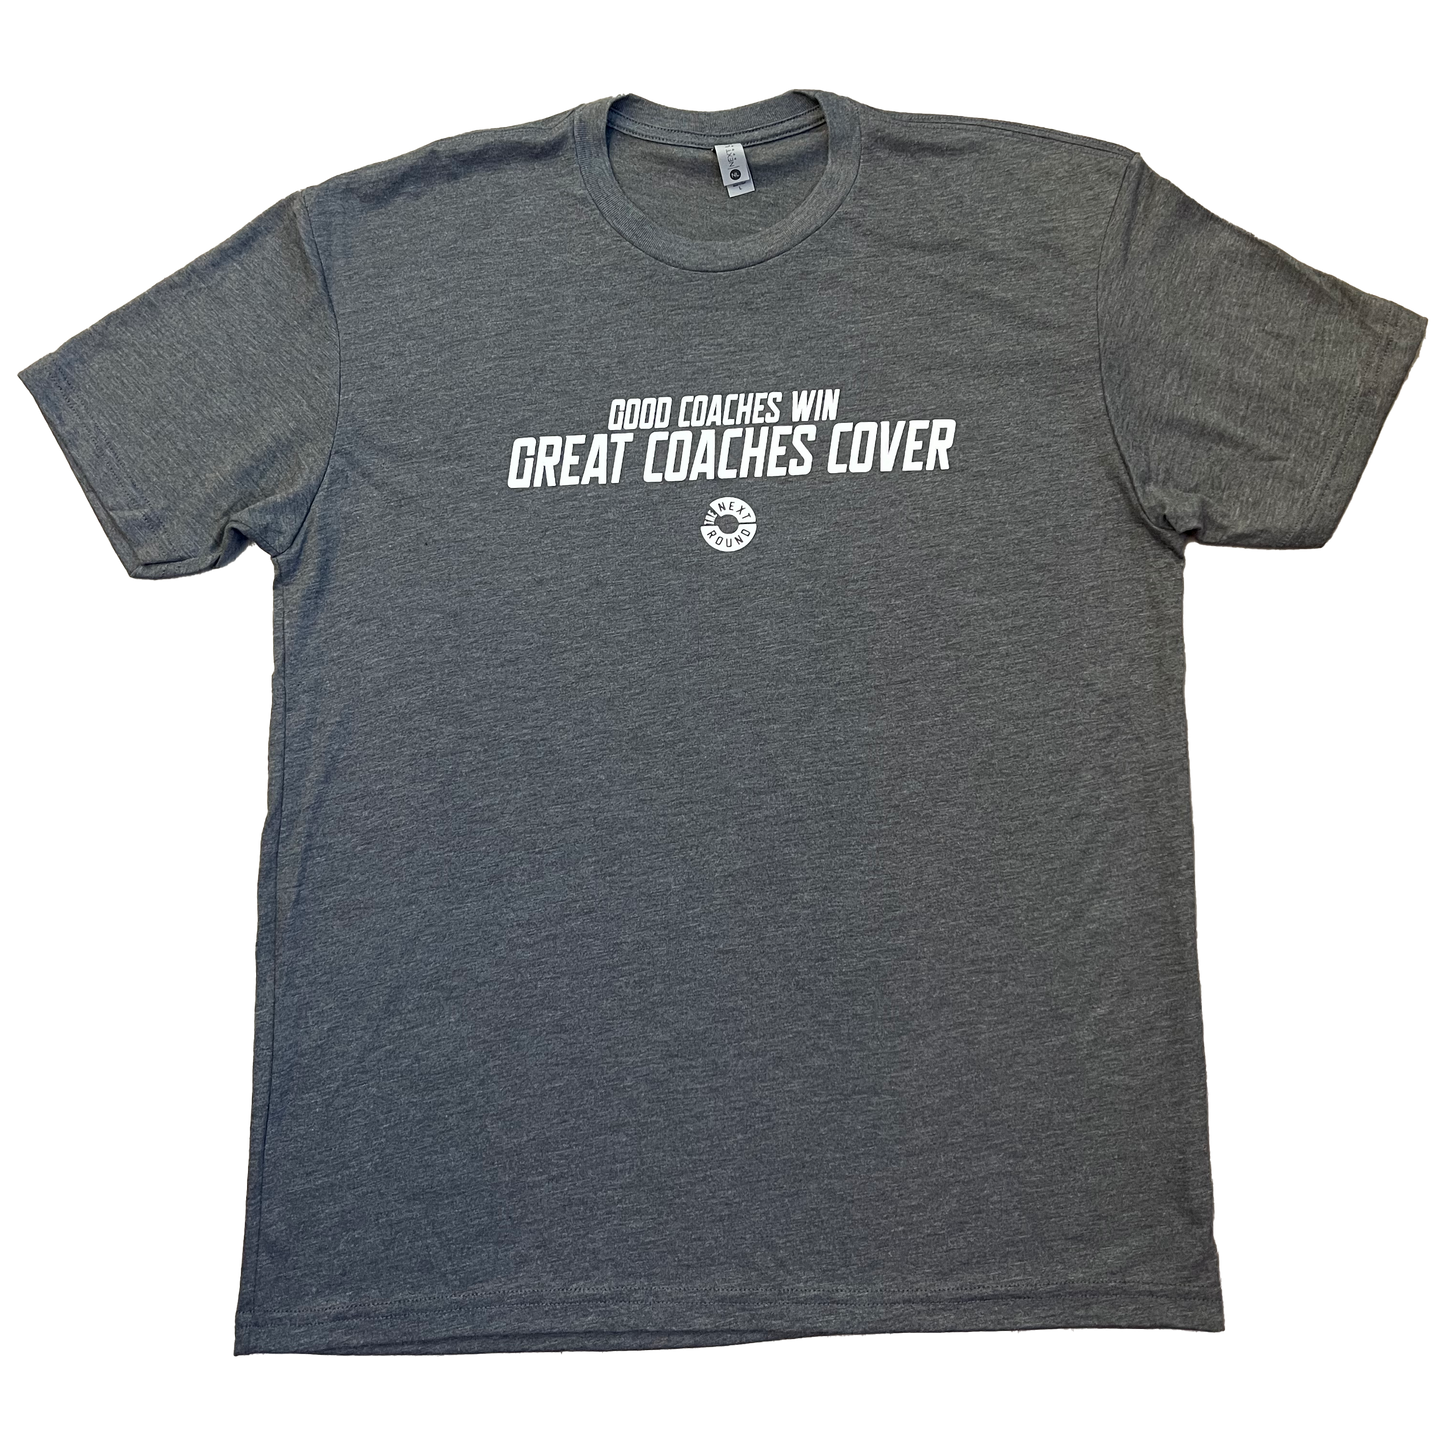 "Good Coaches Win, Great Coaches Cover" Shirt